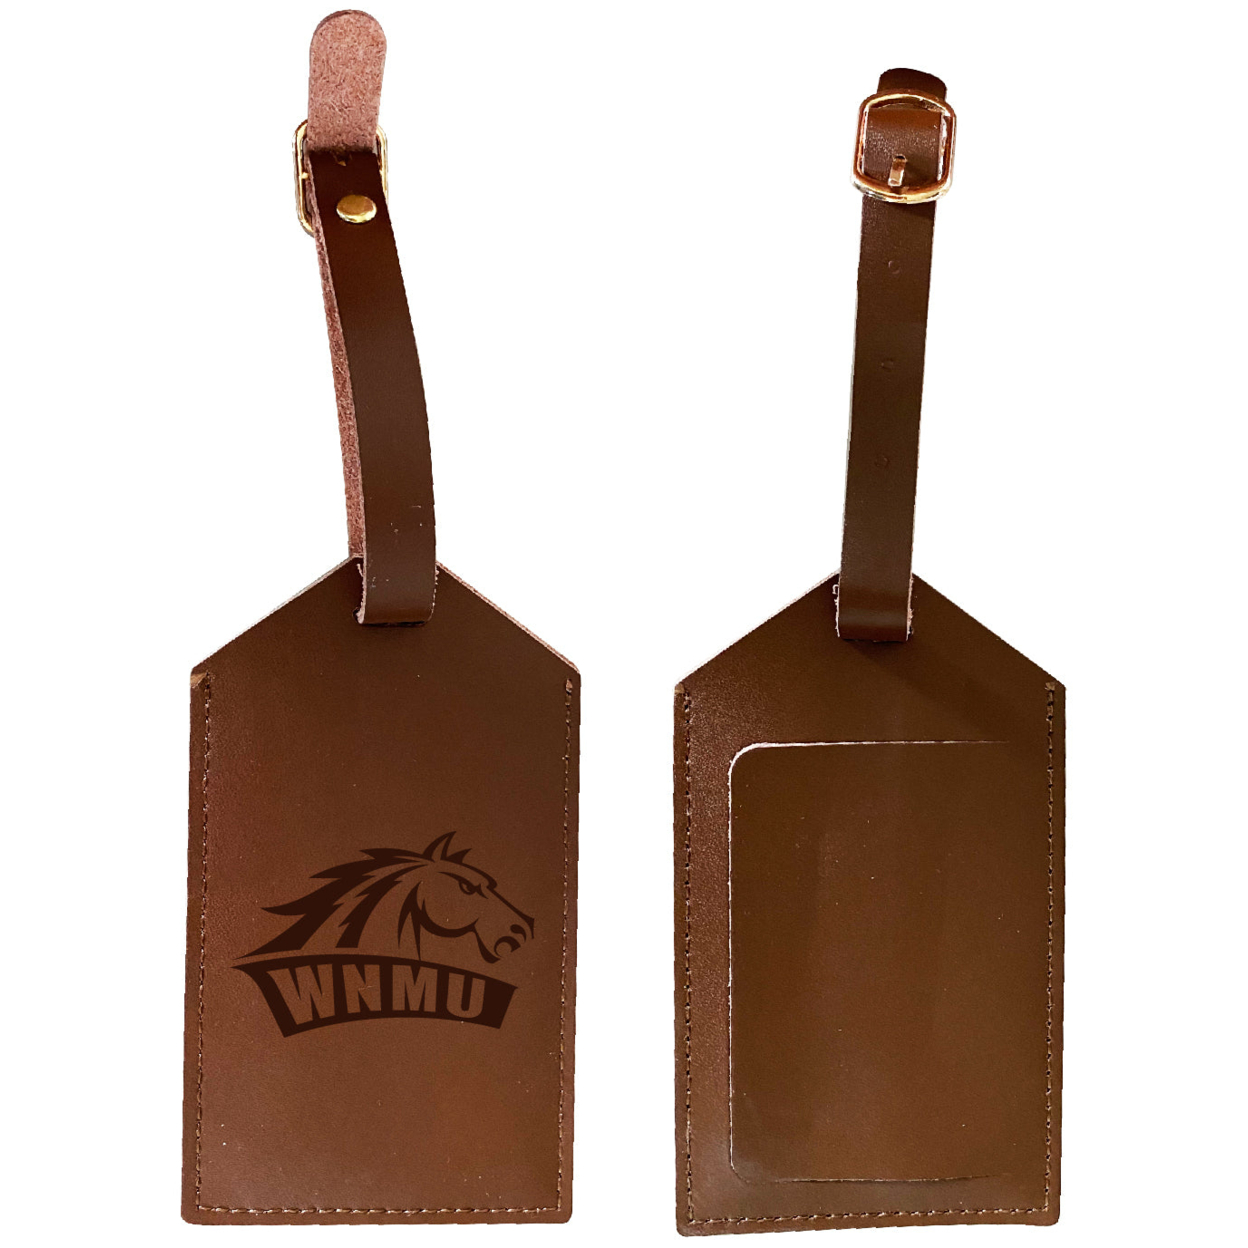 Western New Mexico University Leather Luggage Tag Engraved